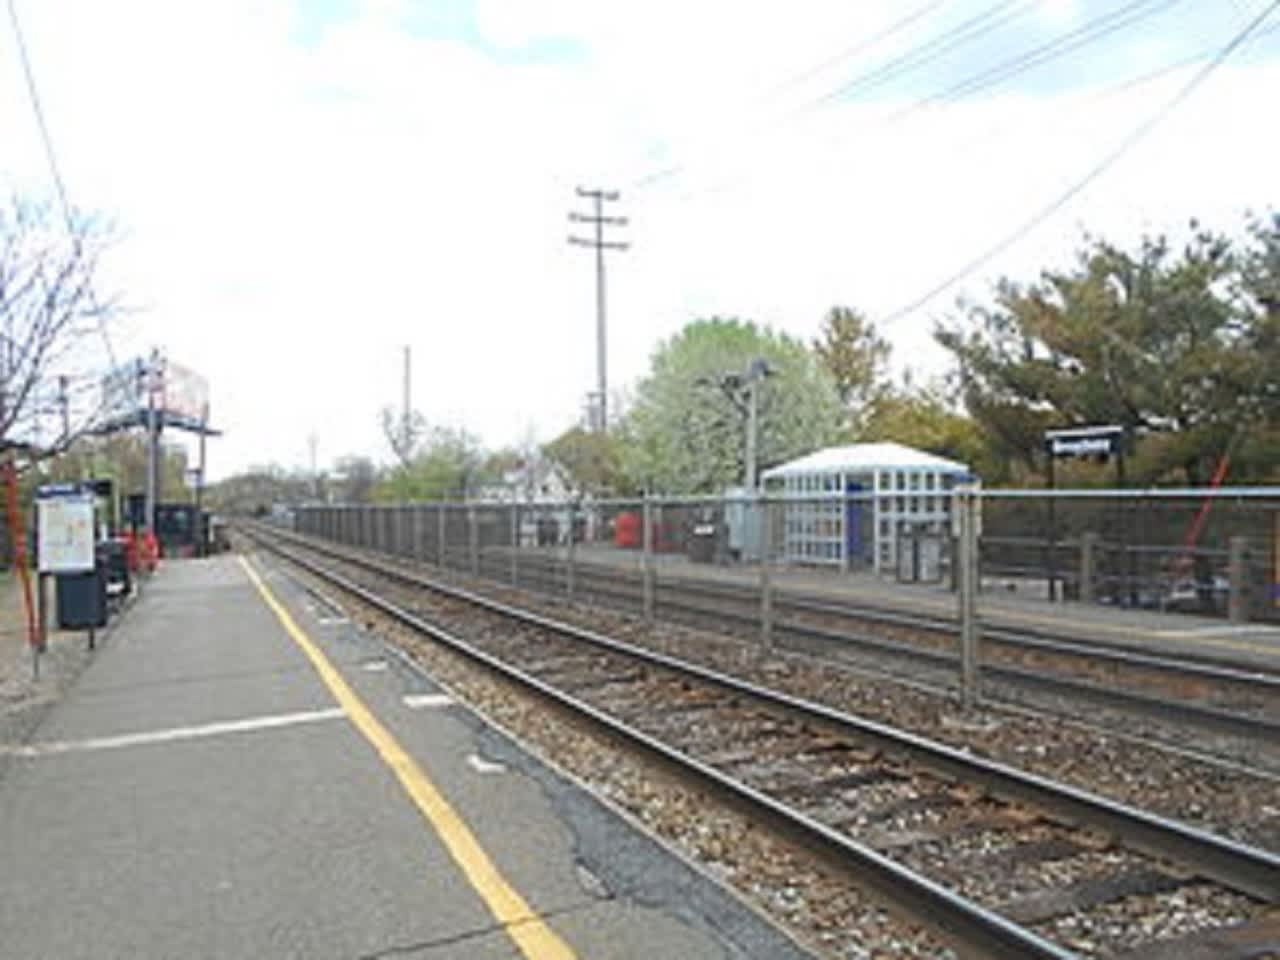 A new ordinance would create a no-stopping/standing zone near the Fair Lawn train station on Broadway.